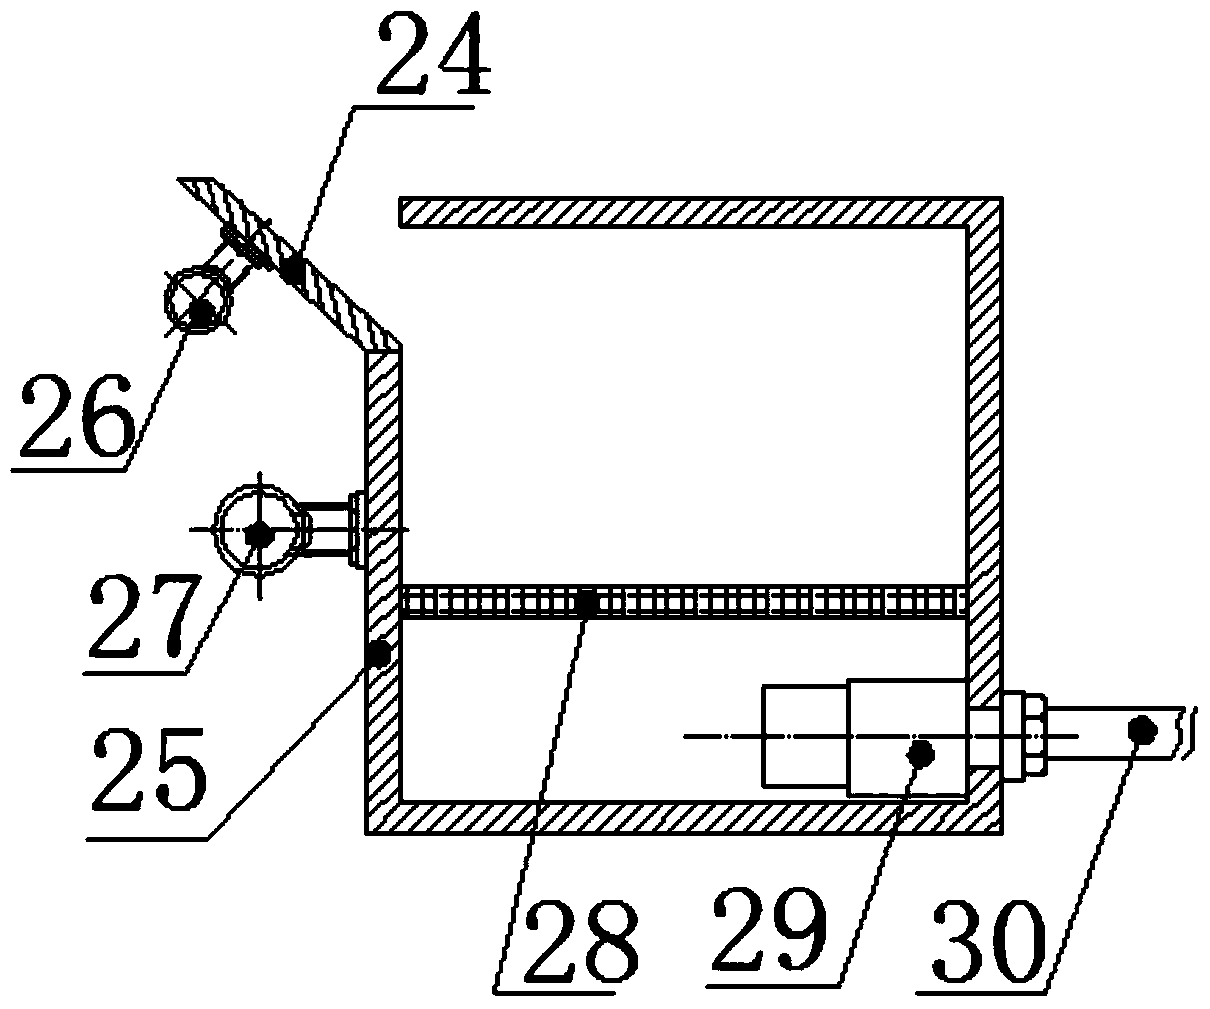 Control method of multi-mode wall cleaning robot